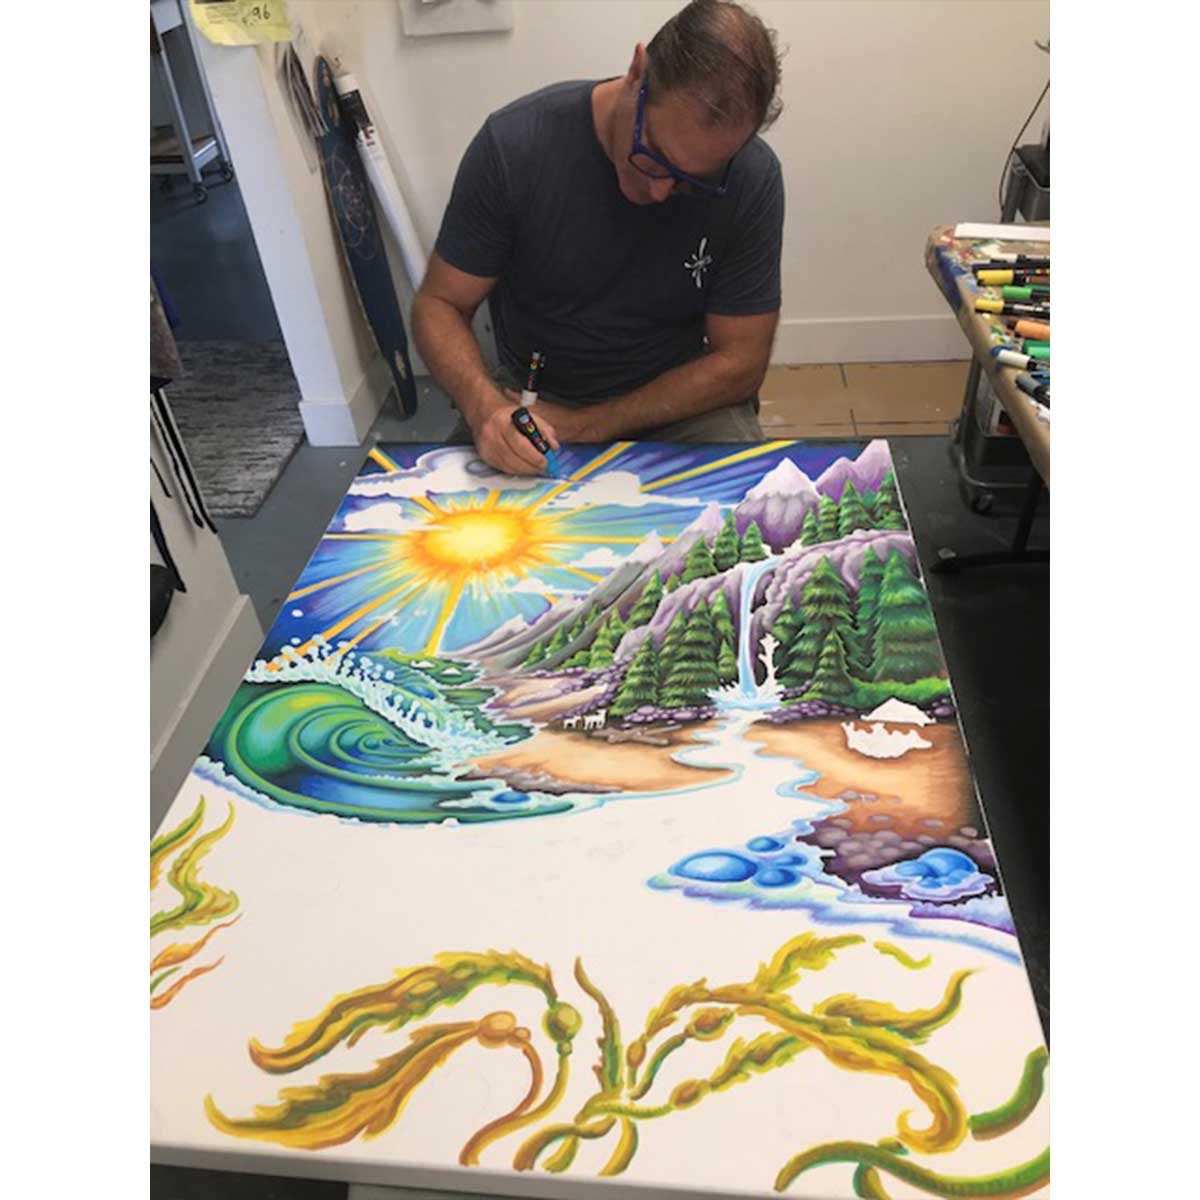 The beggining stages of Drew Brophy painting the Life Force painting.